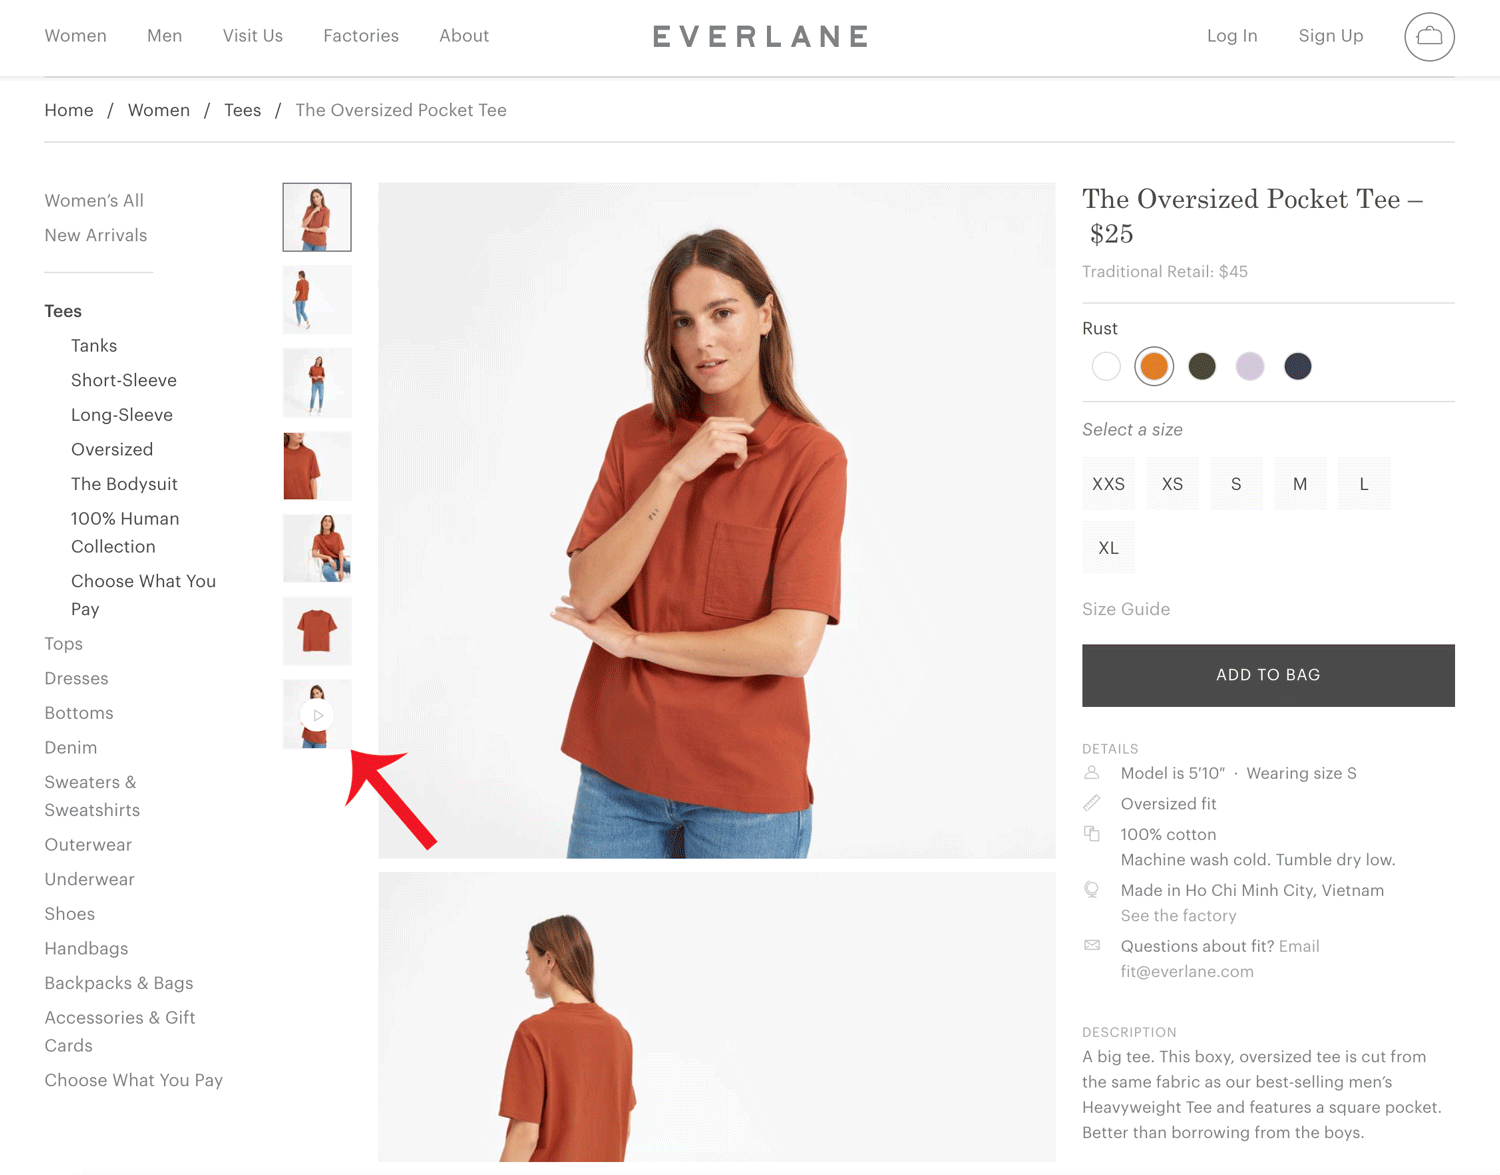 Screenshot showing a product page on Everlane